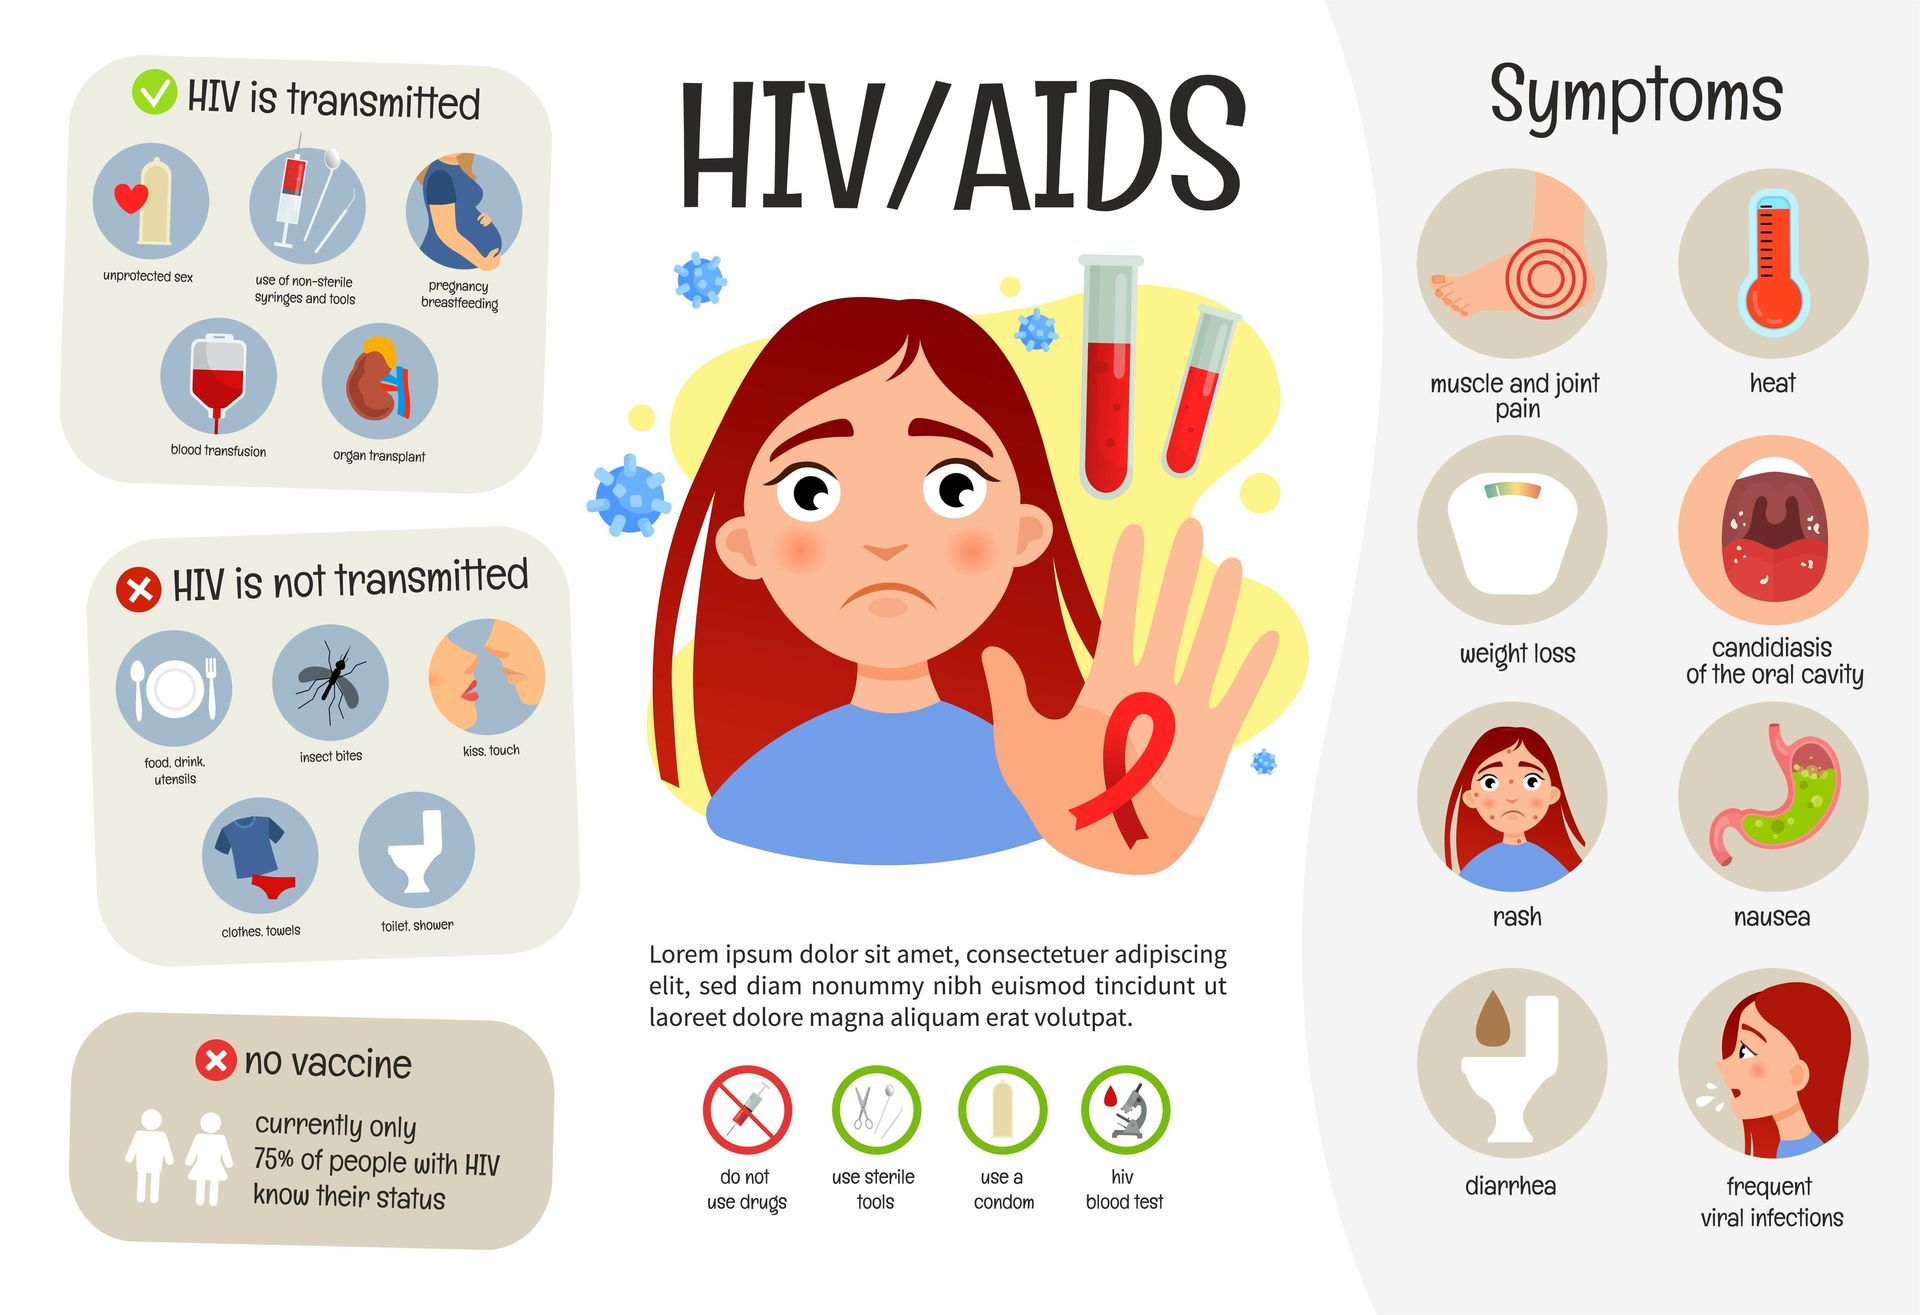 early signs and symptoms of HIV